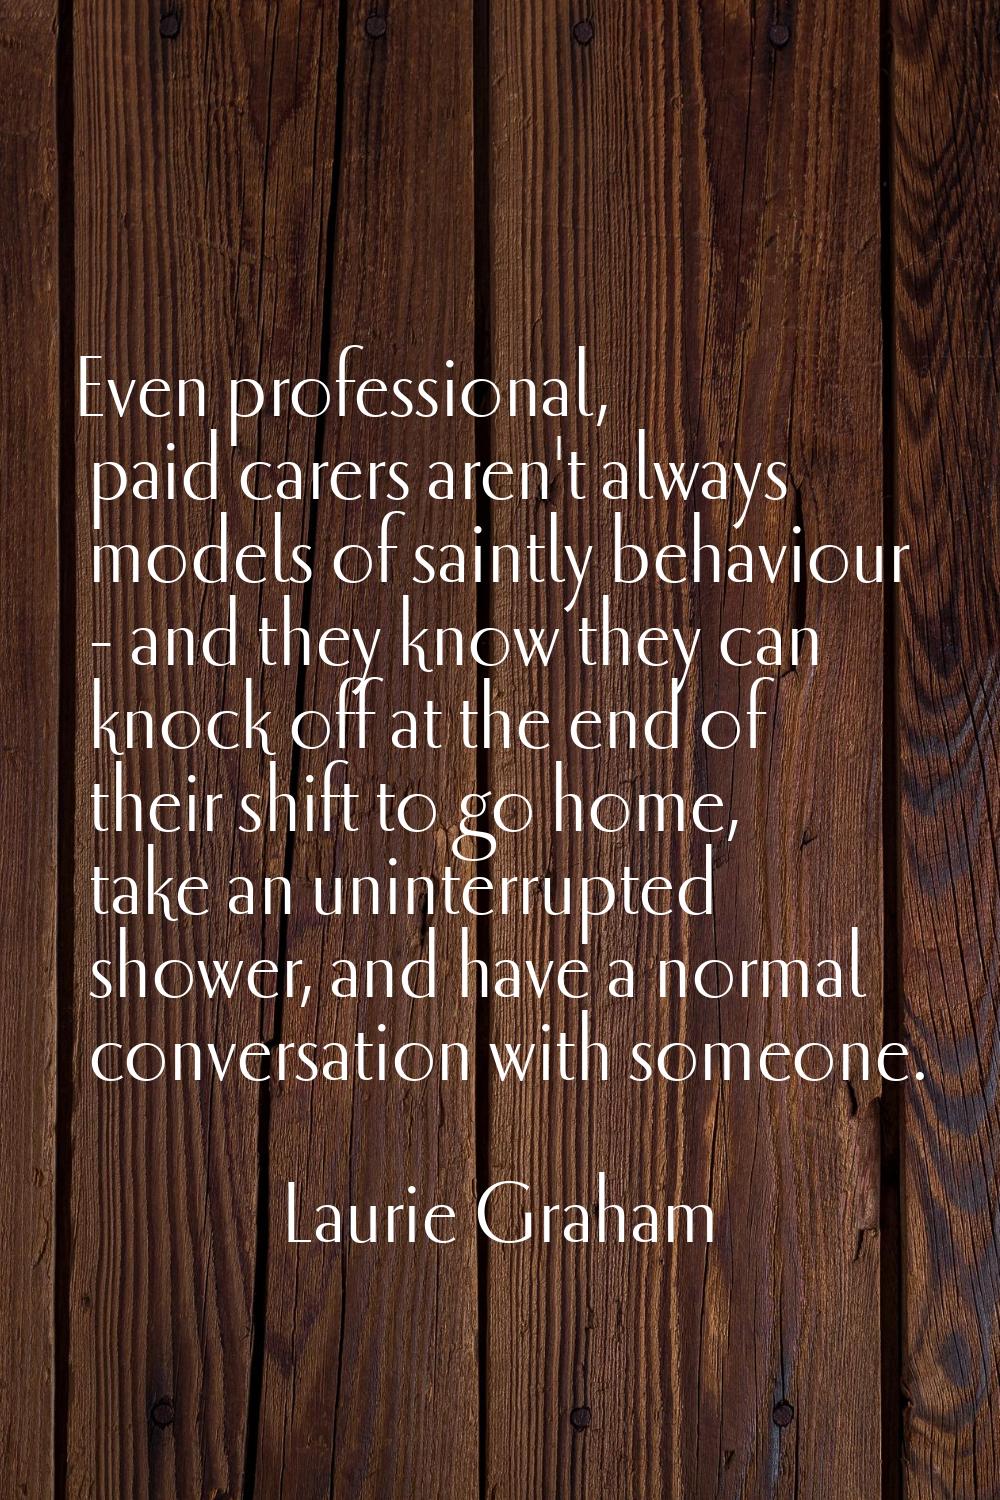 Even professional, paid carers aren't always models of saintly behaviour - and they know they can k